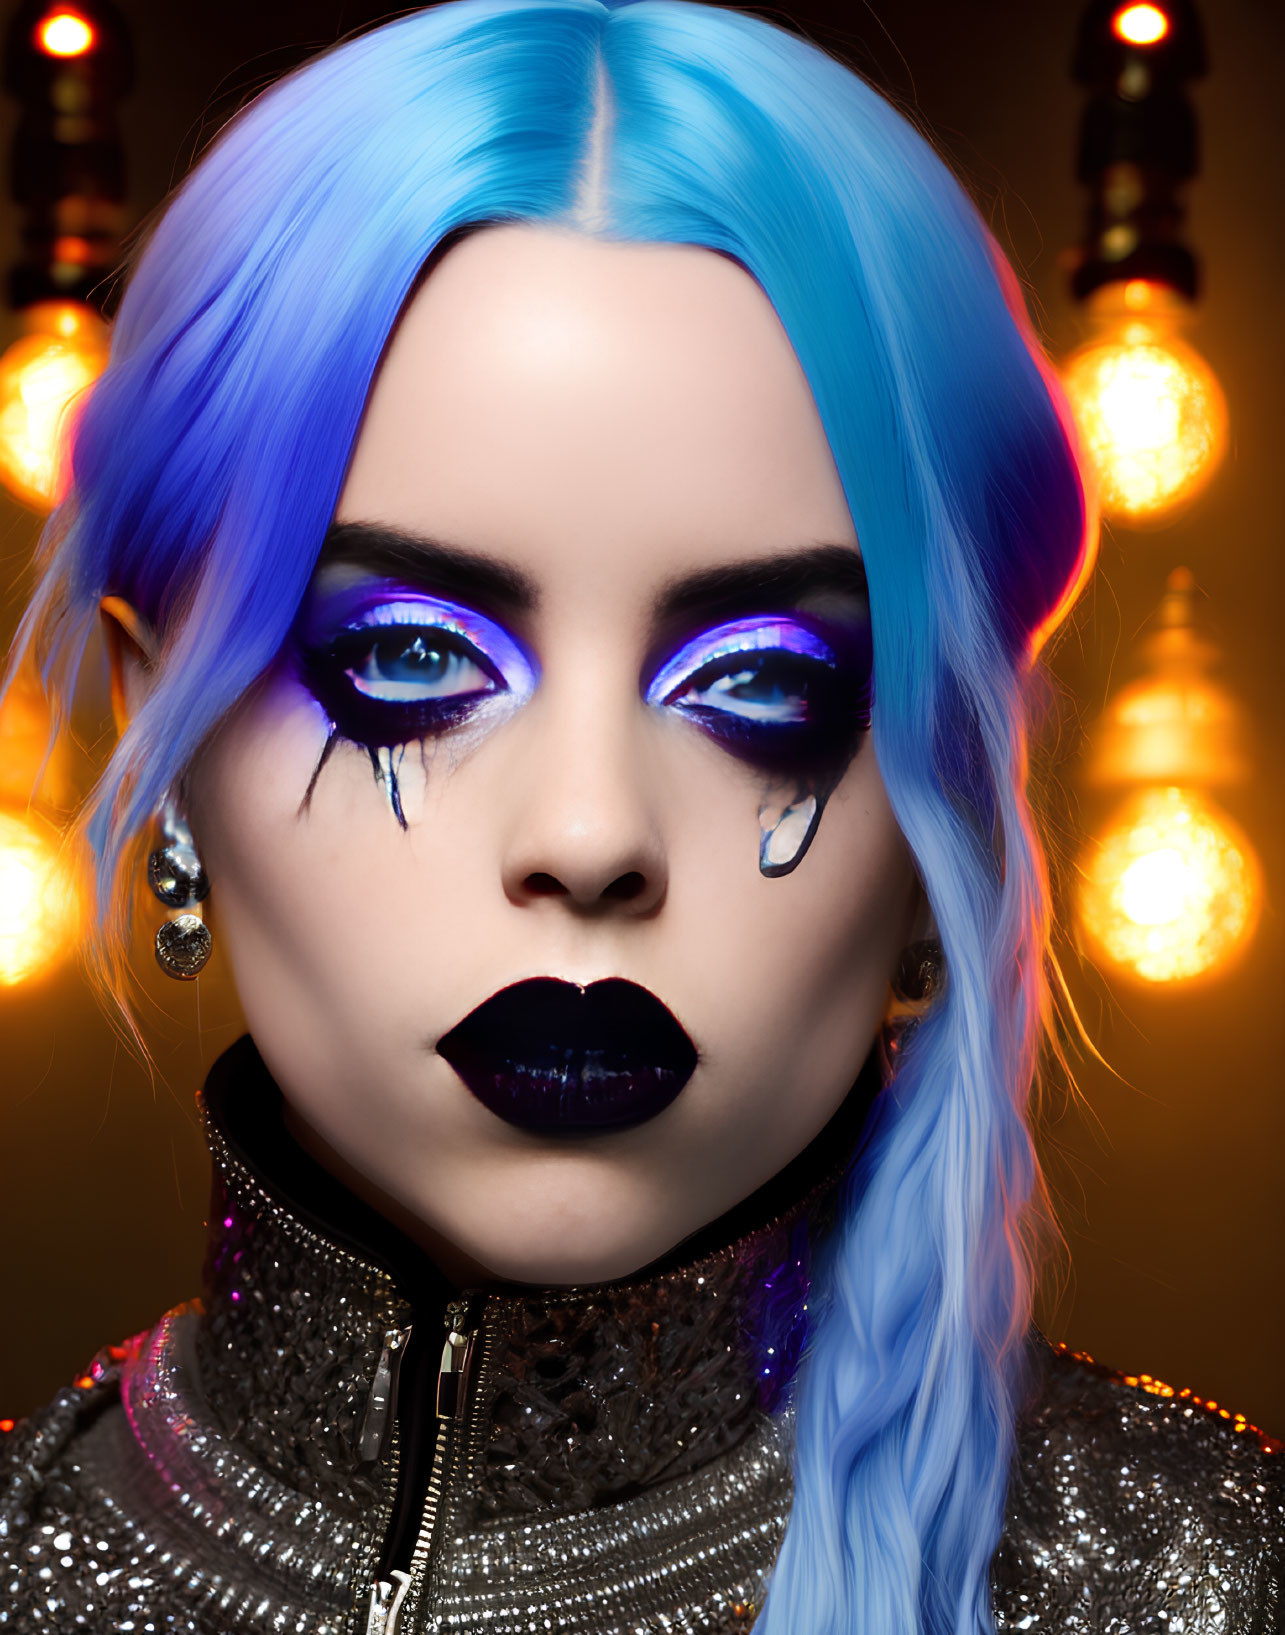 Blue-haired person with dramatic makeup and sparkly outfit in warm light setting